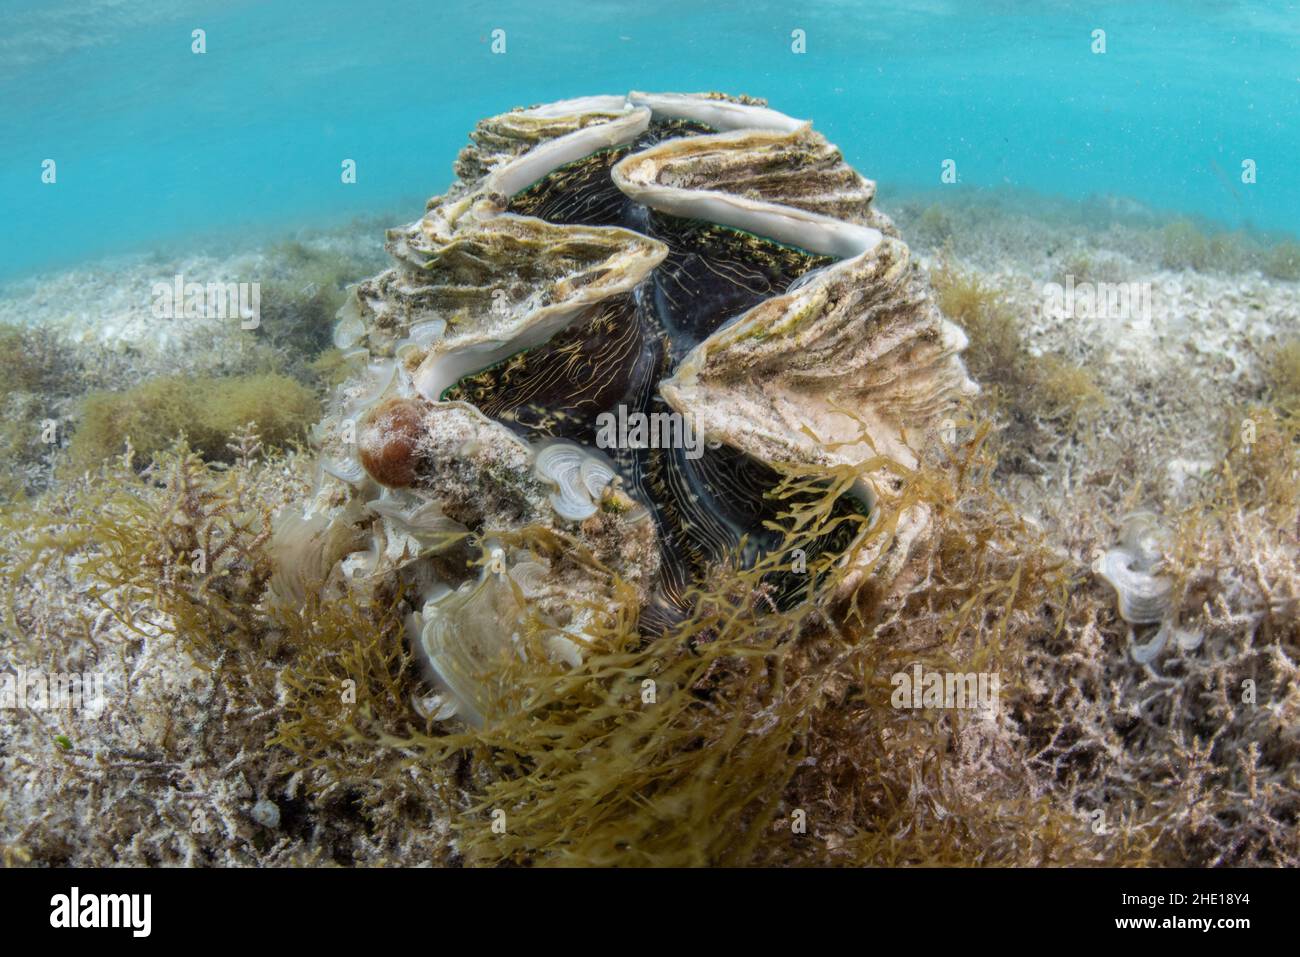 A giant clam in the Tridacna genus in shallow water in the Red sea, Egypt. Stock Photo